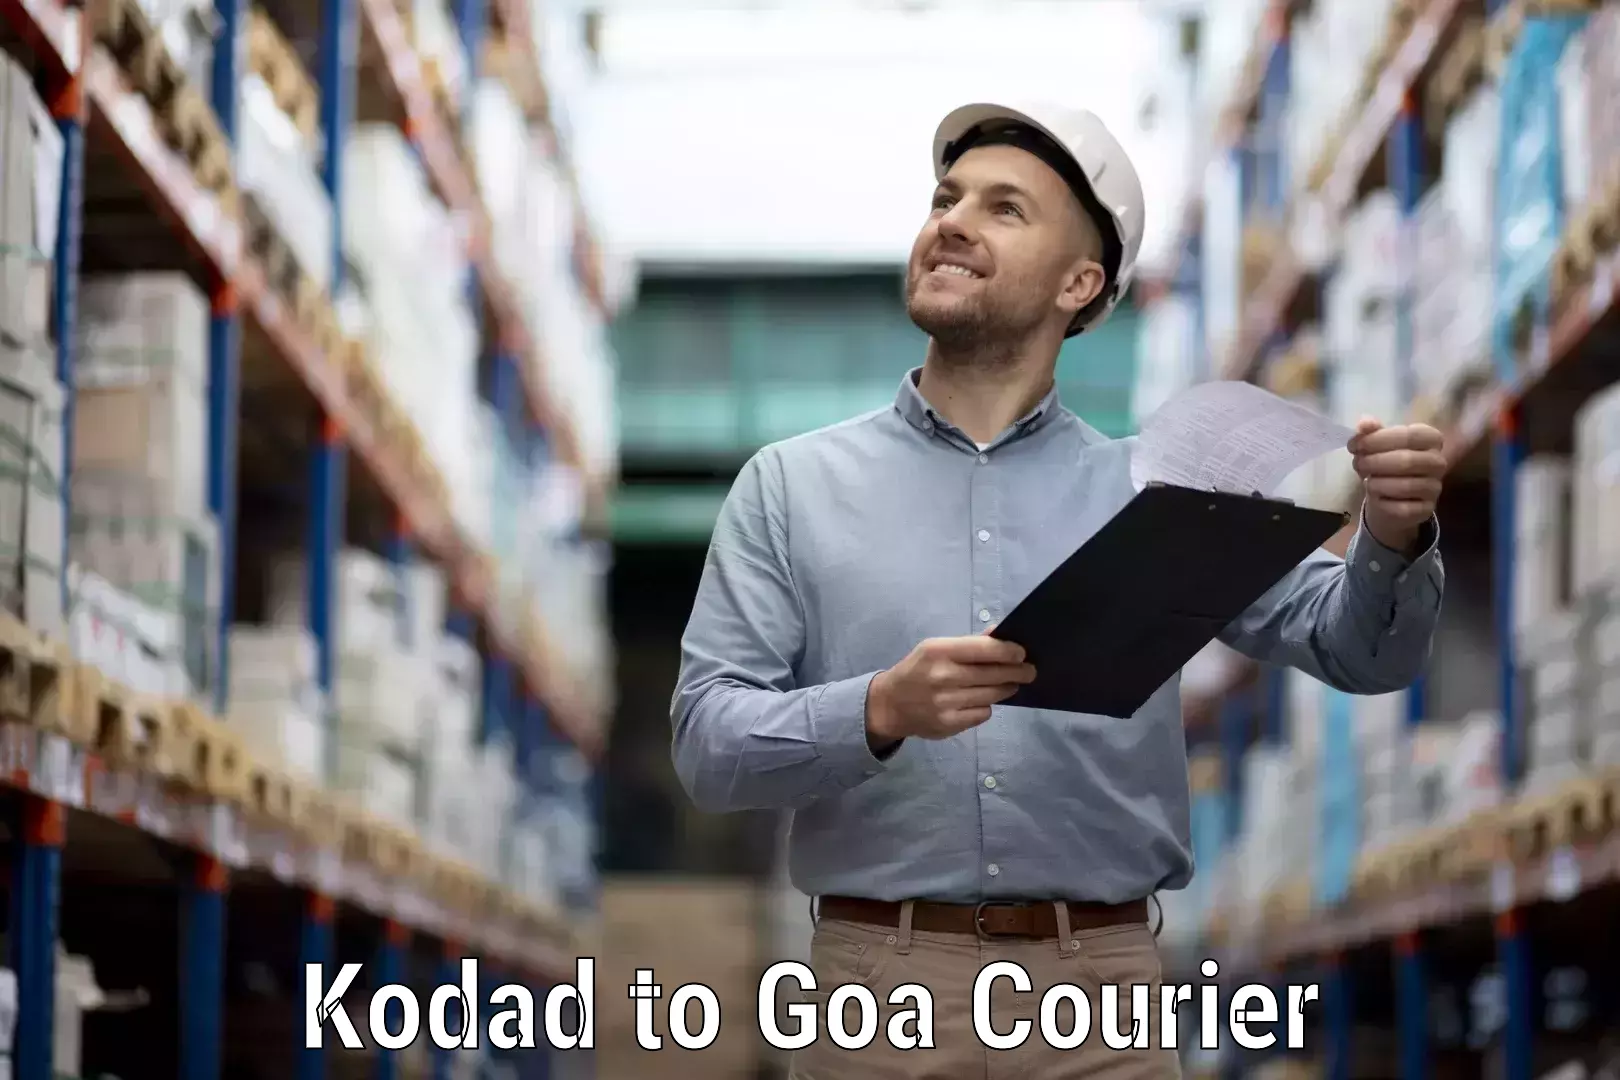 Customer-focused courier Kodad to South Goa